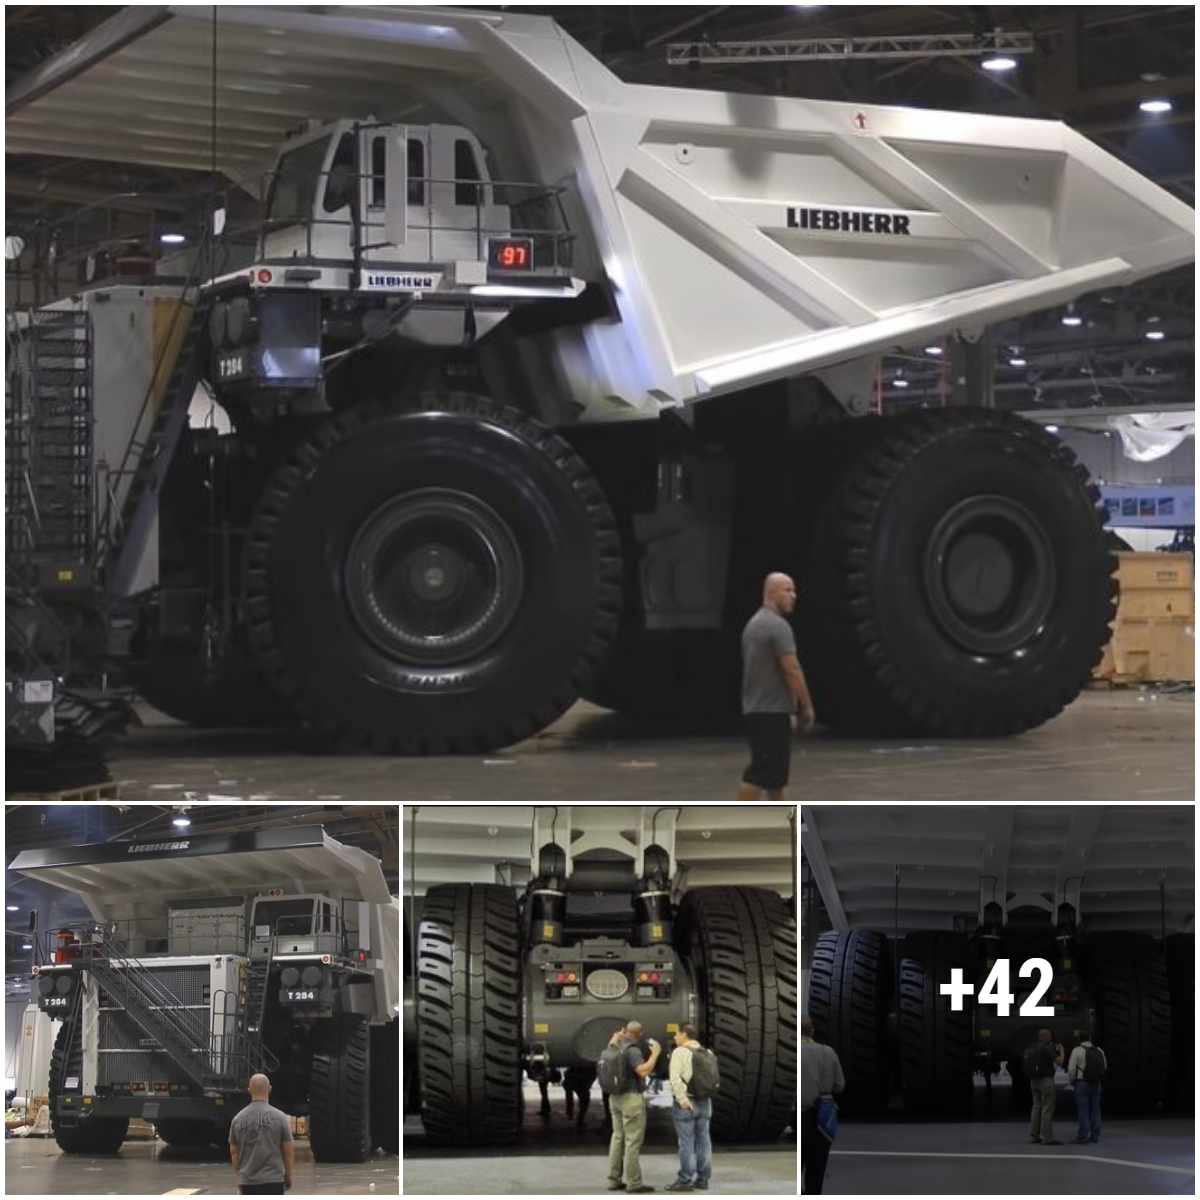 The 400-tonne Liebherr T-284 mining truck is a huge vehicle with incredible carrying capacity